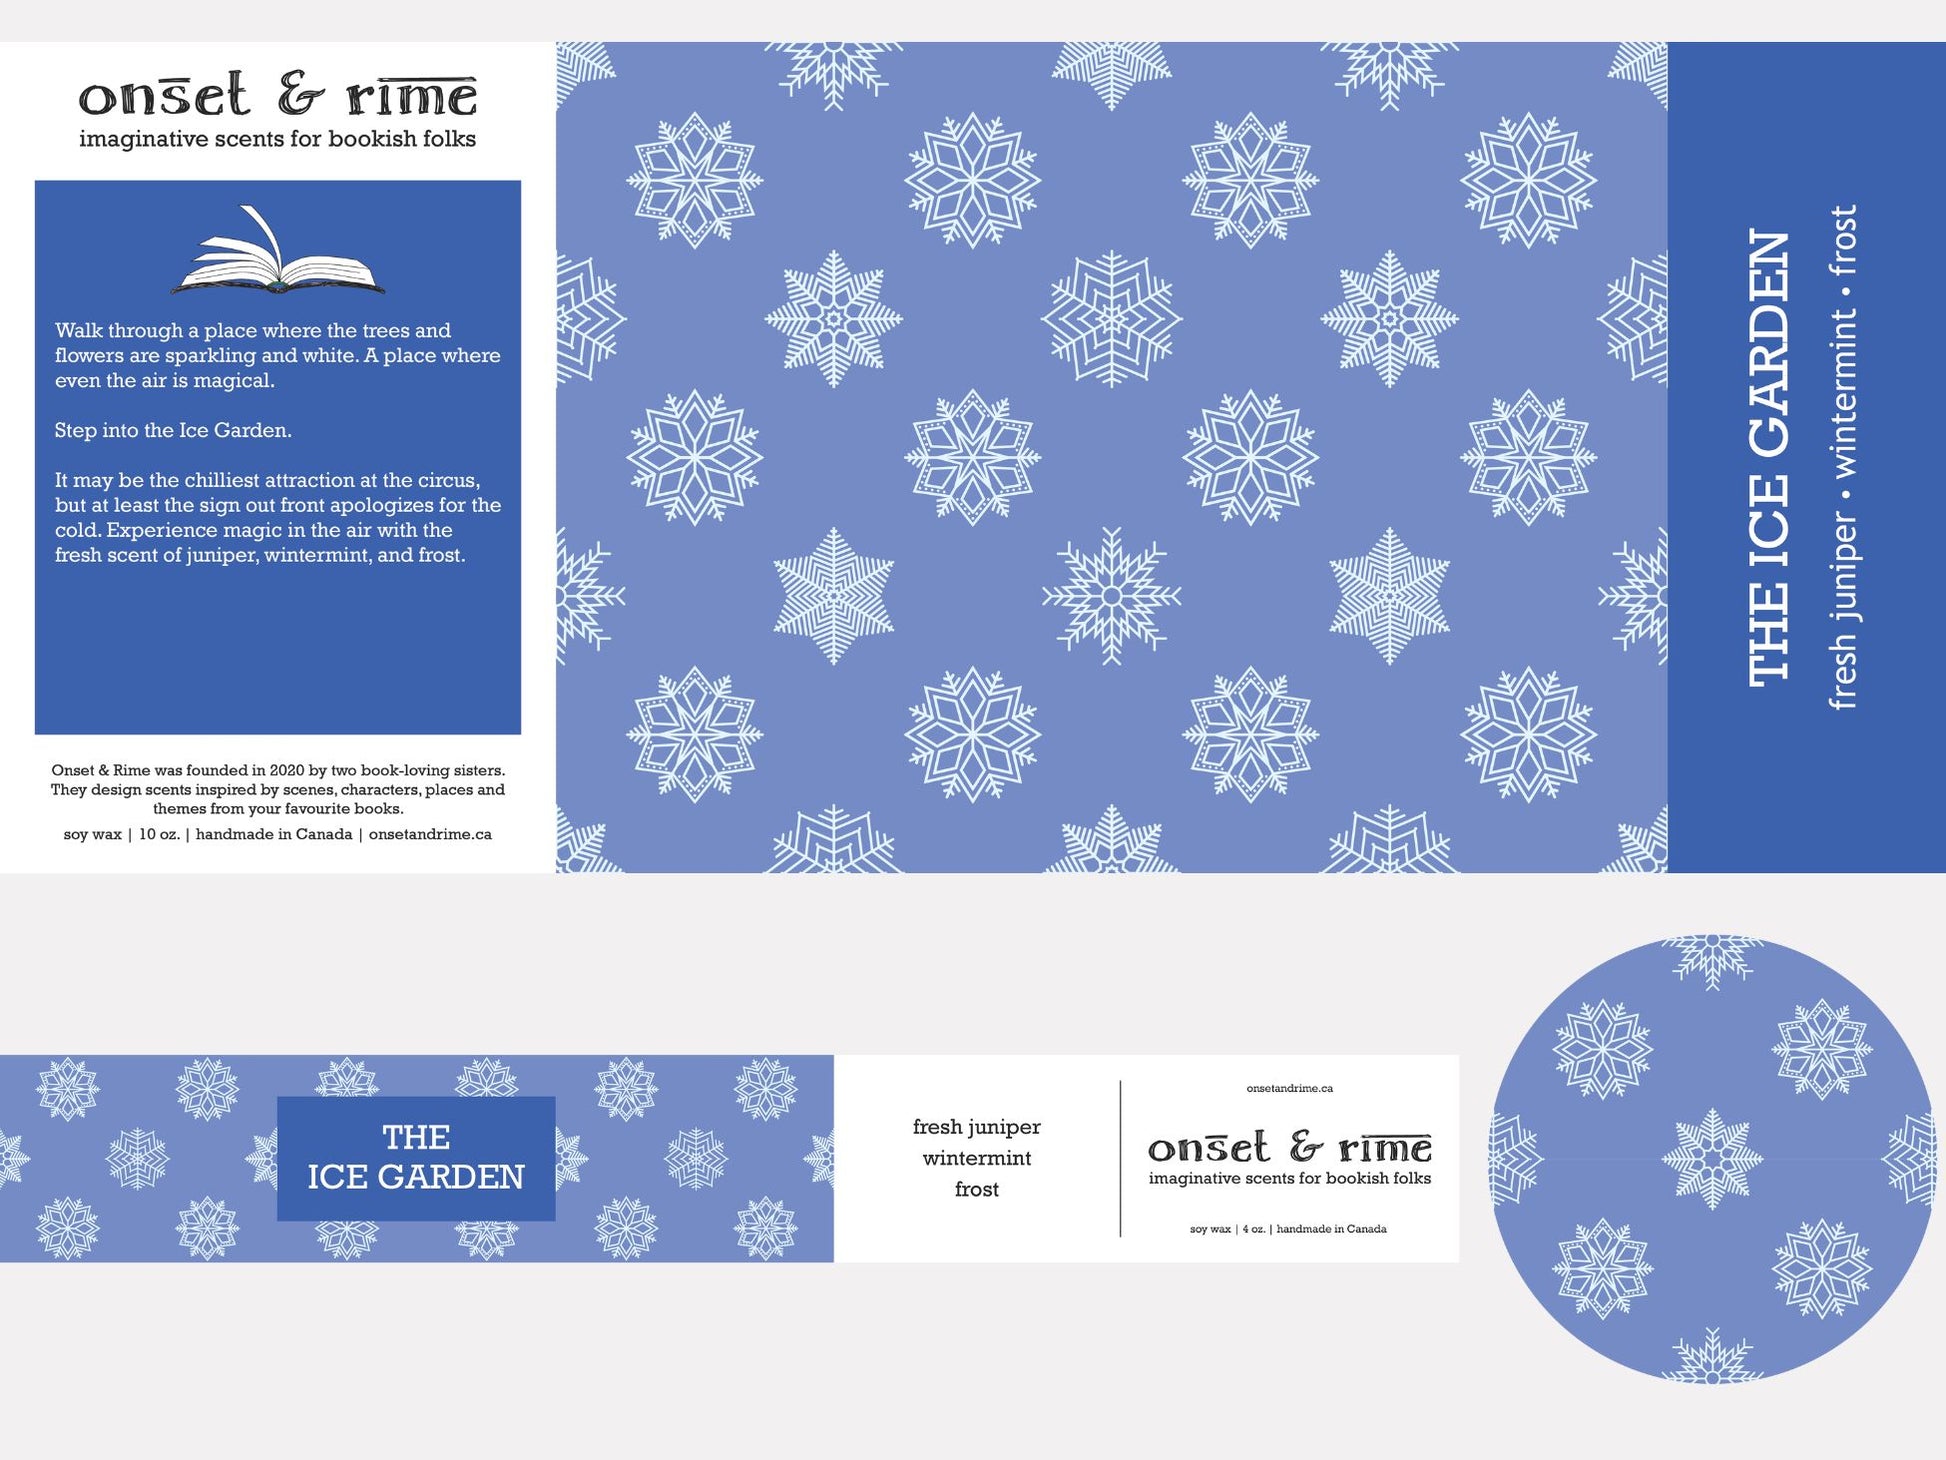 A close up view of the label for the Onset & Rime juniper and mint scented candle called "The Ice Garden". The label is blue with a pattern of lighter blue snowflakes. The text on the label is "The Ice Garden - Fresh Juniper, Wintermint, Frost".